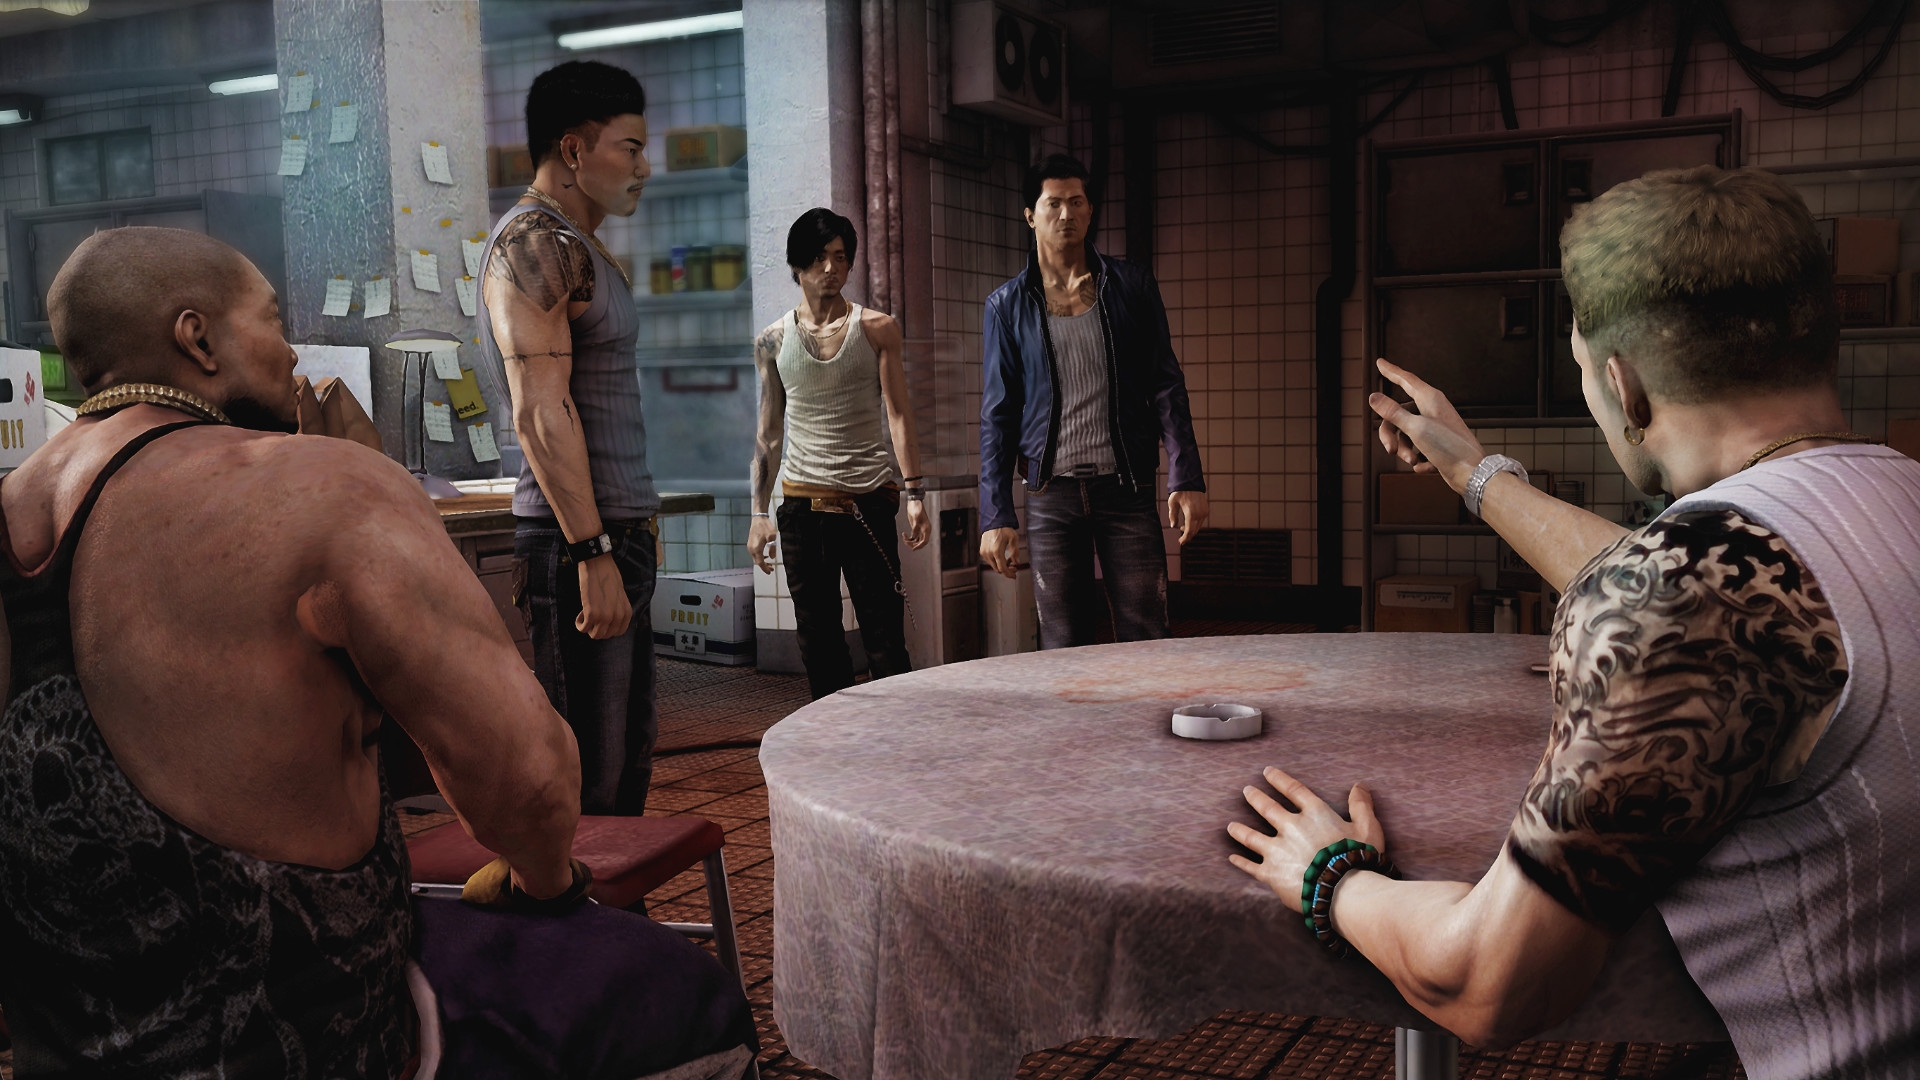 Why Square Enix Decided Not To Move Forward With Sleeping Dogs 2